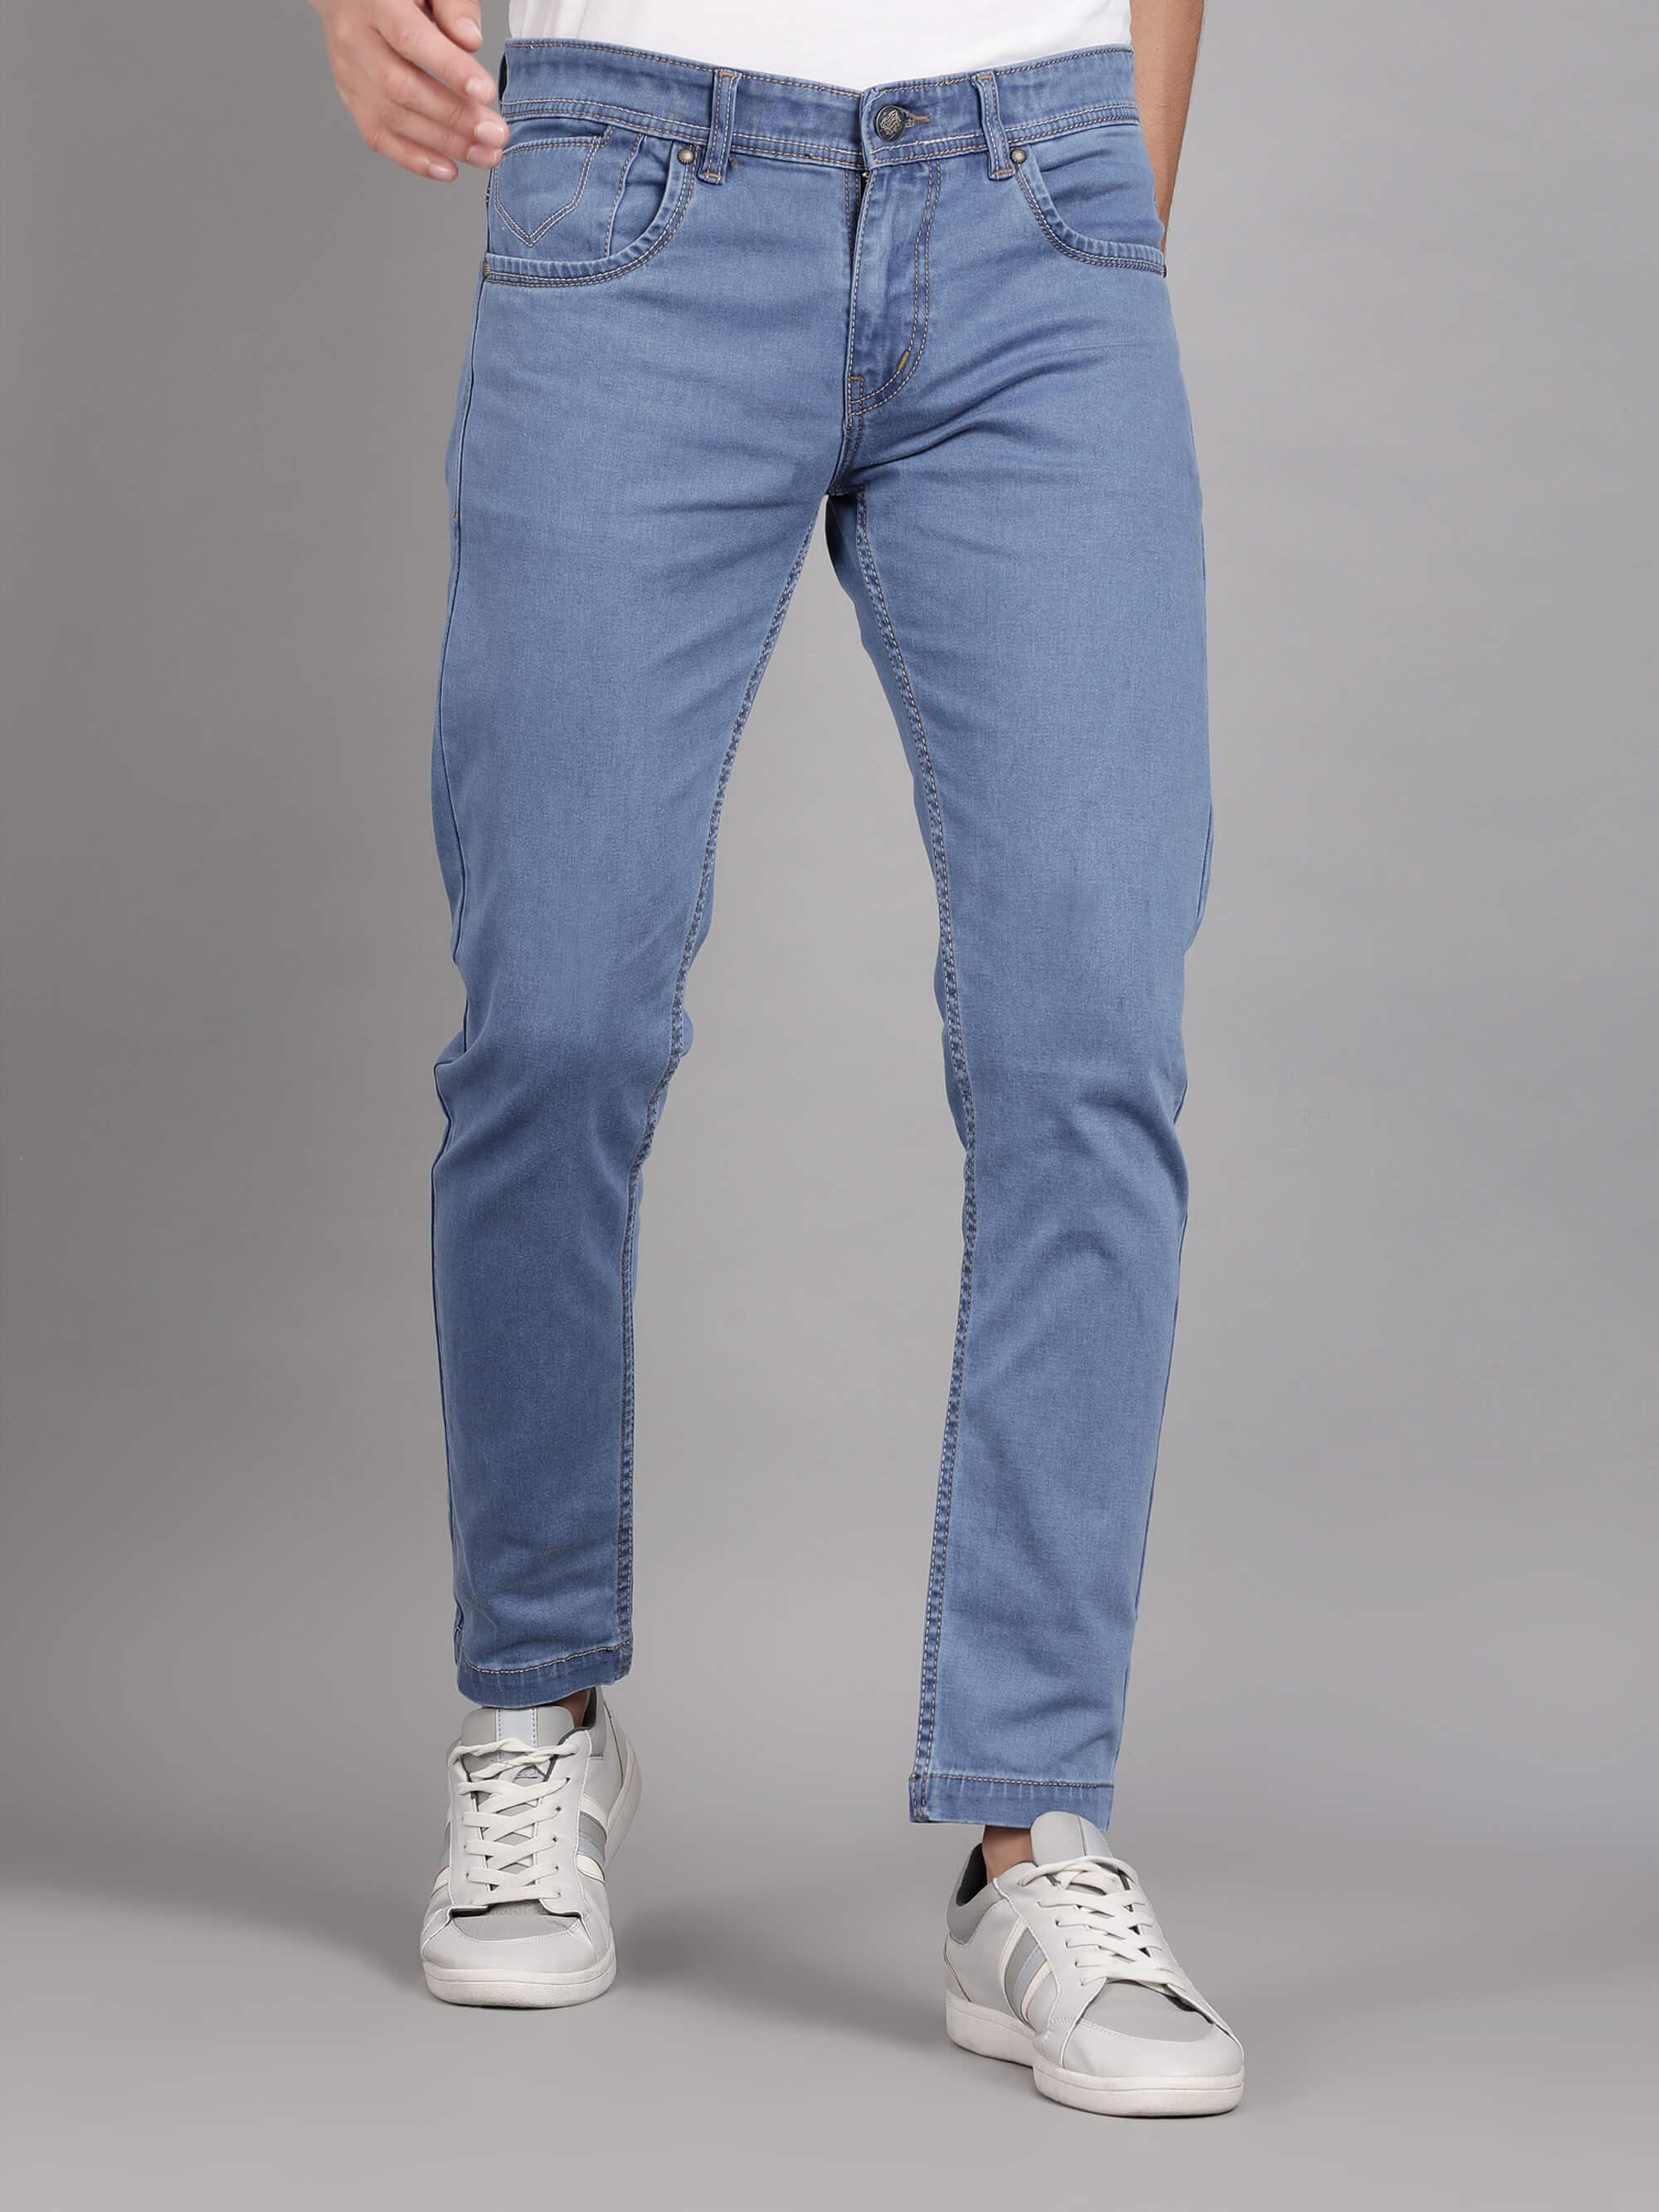 JDY by ONLY Light Blue High Rise Skinny Jeans